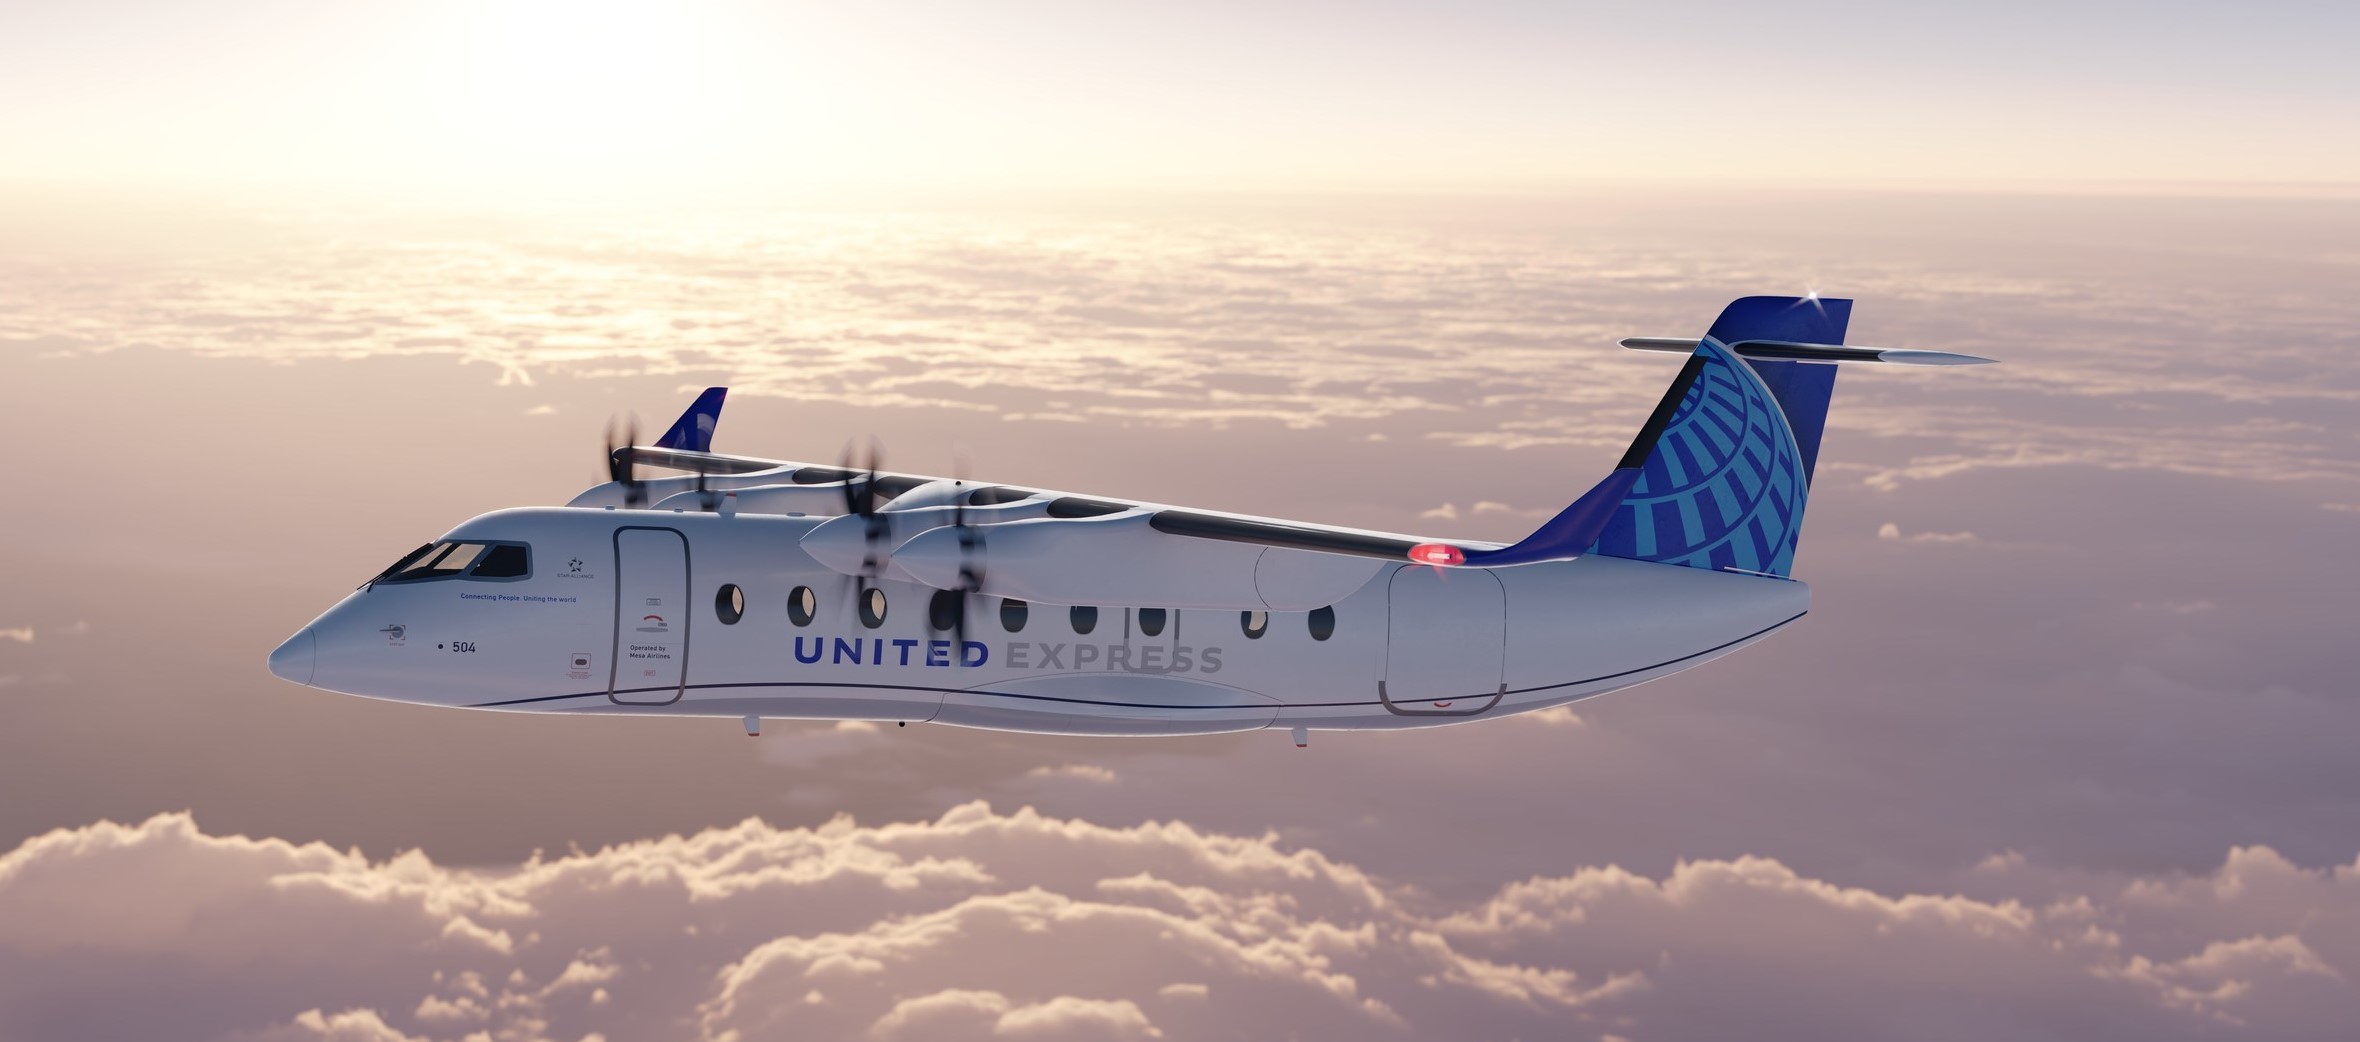 Making a Pre-condition of safety,  business and operating requirements, United Airlines agreed to buy 100 'ES-19' electric aircrafts of startup Heart Aerospace .